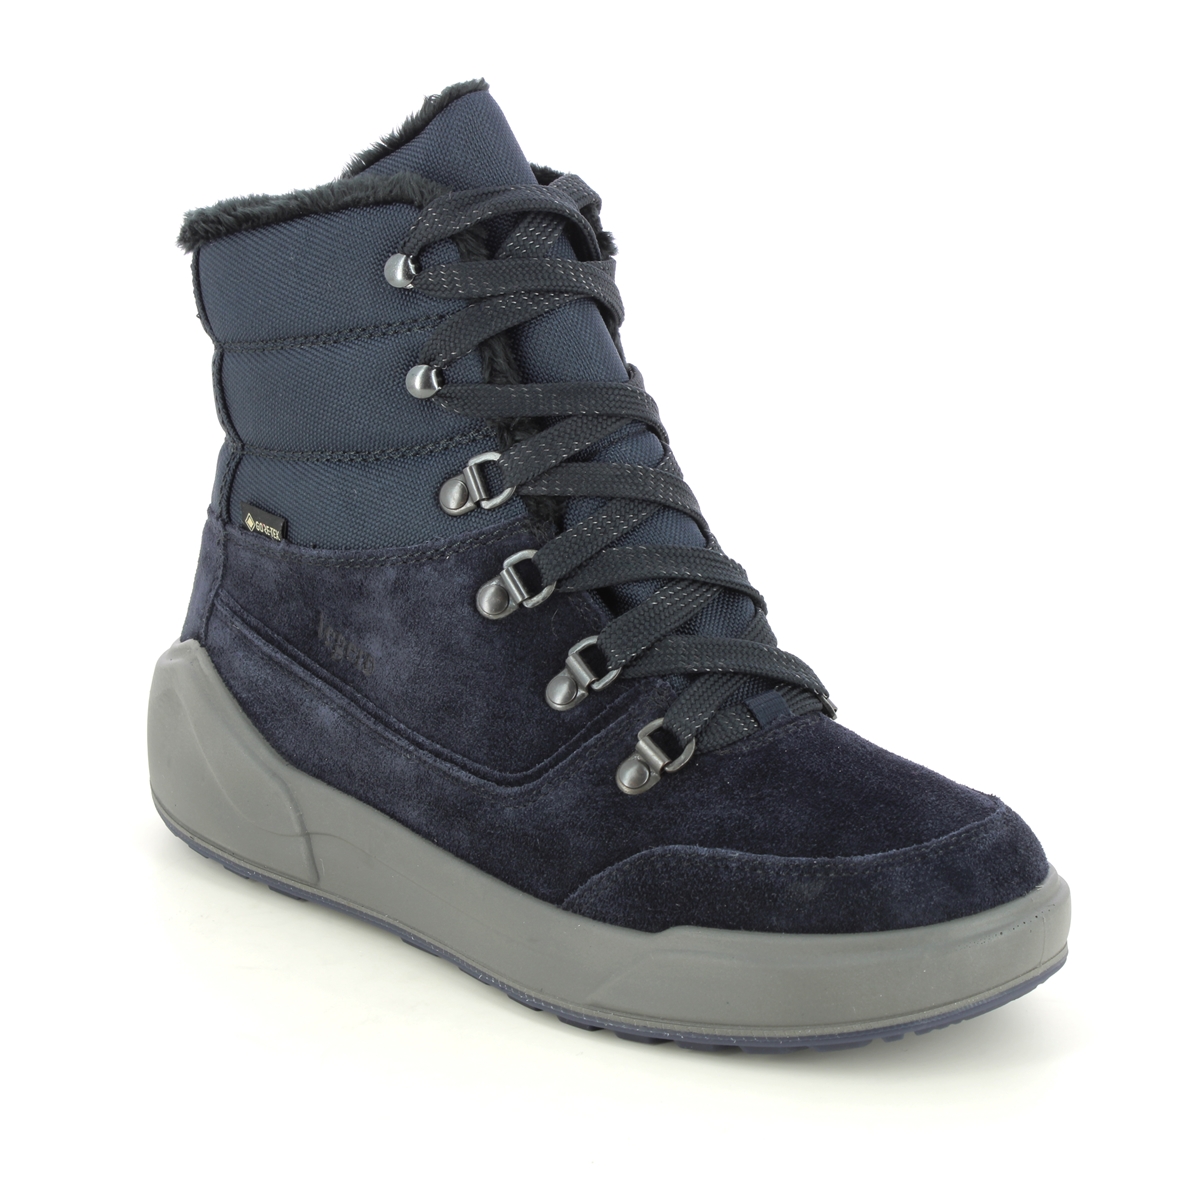 Legero Cosy Lace Gtx Navy Suede Womens Winter Boots 2000286-8000 In Size 5.5 In Plain Navy Suede